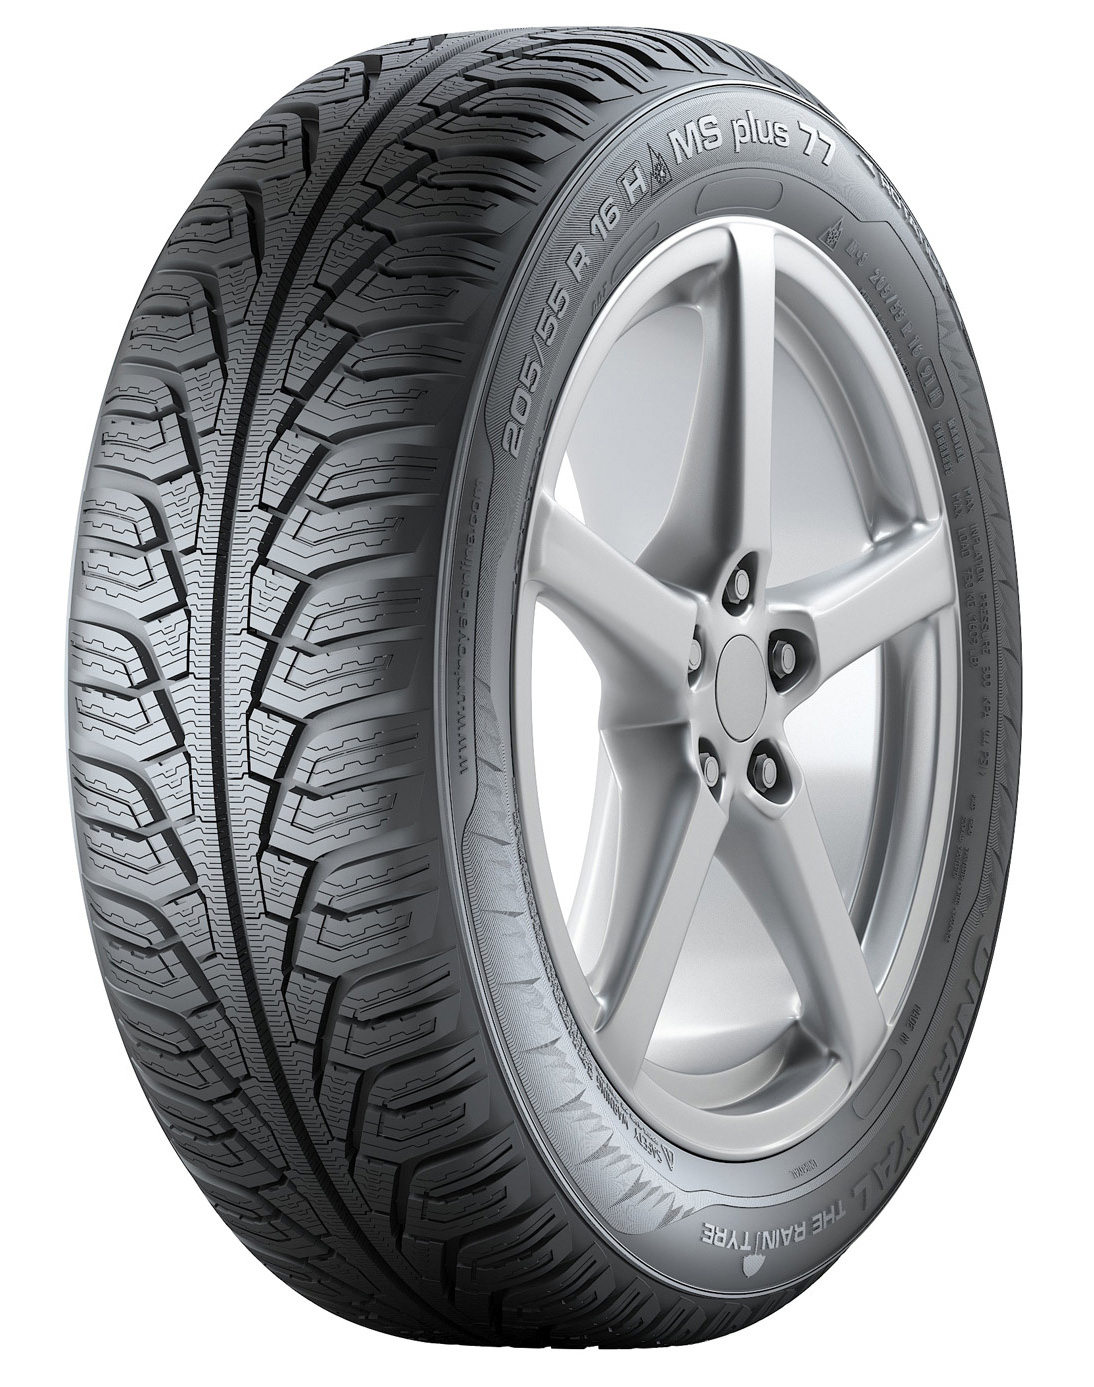 Buy cheap Uniroyal MS Plus 77 tyres from your local Setyres